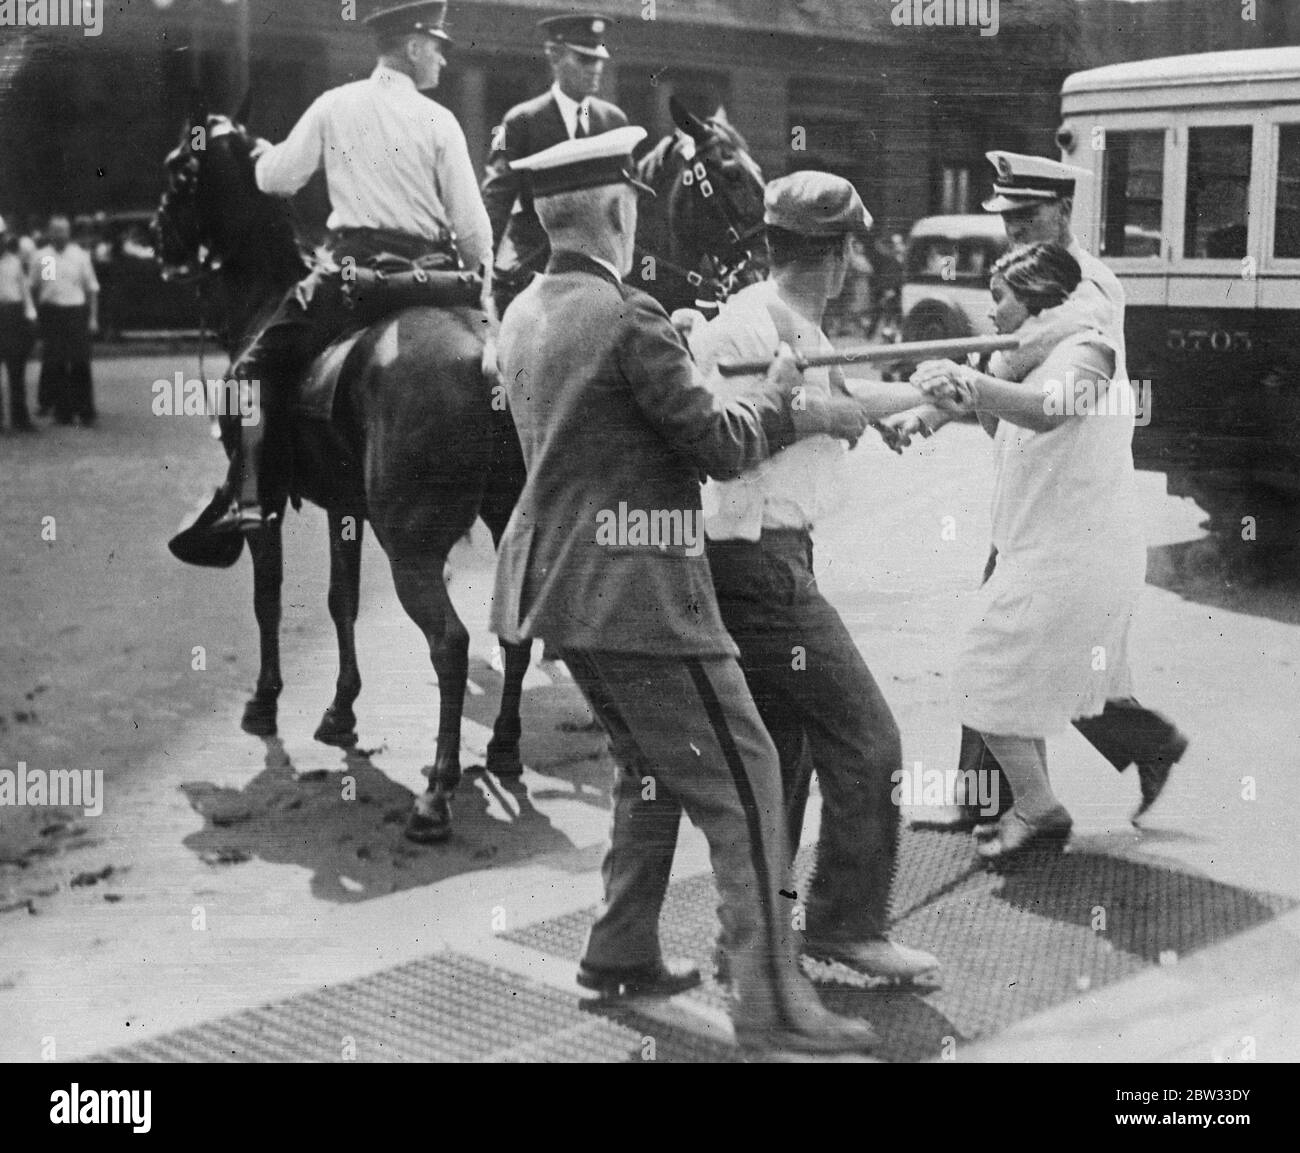 Police make short work of hunger marchers in Philadelphia . Hunger marchers who rioted near the City Hall in Philadelphia , USA were quickly dispelled by police and park guards who brought clubs and fists into play . A girl rioter being forcibly removed during the excitement . 2 September 1932 Stock Photo